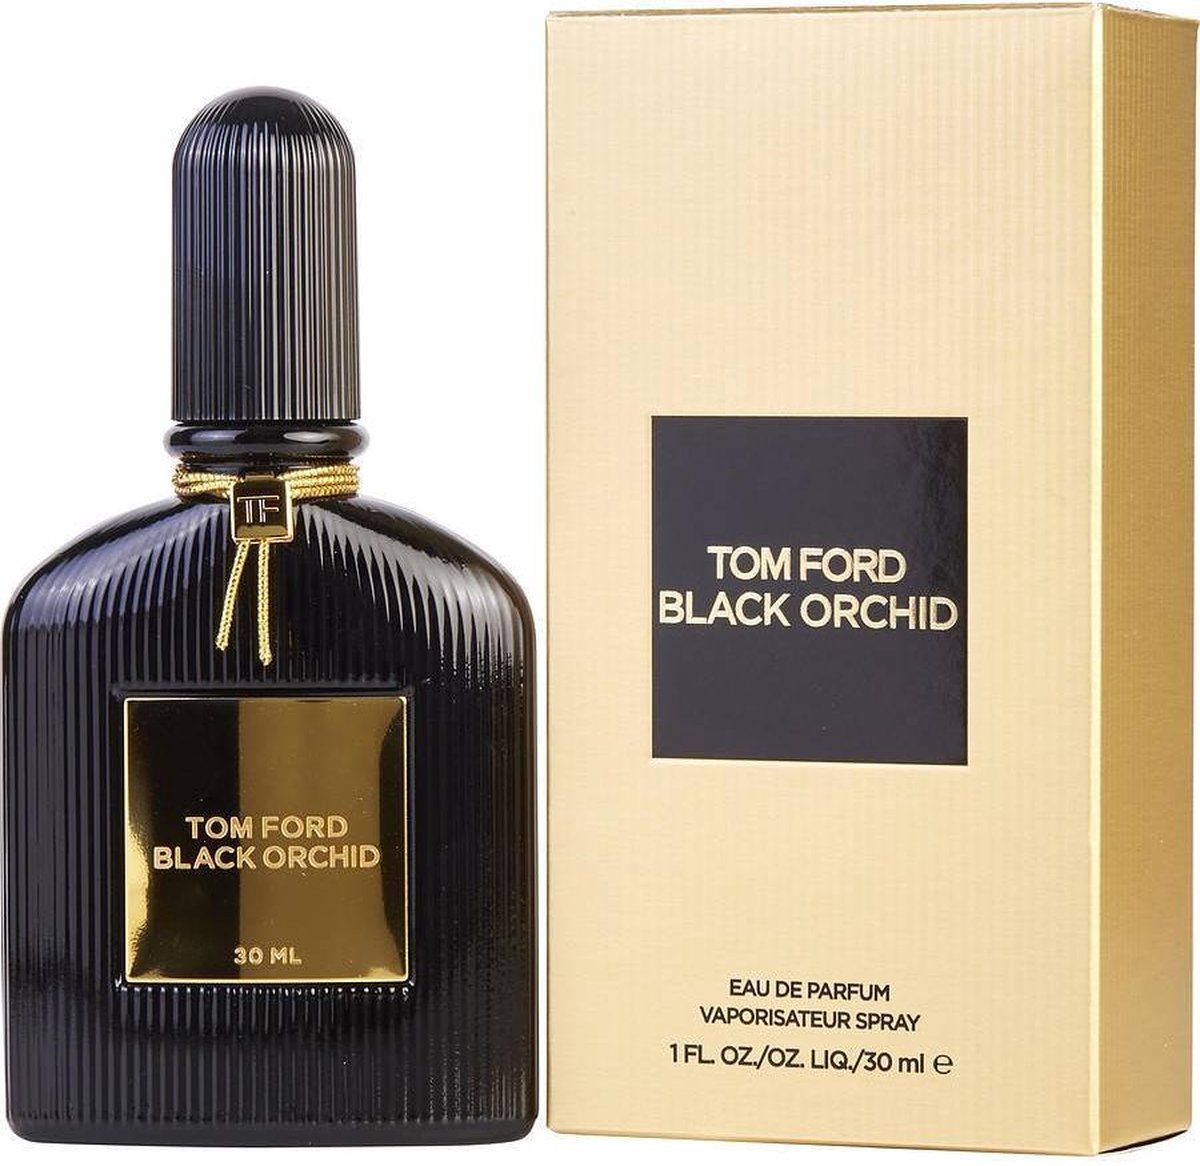 Tom Ford Black Orchid Perfume Flash Sales, 56% OFF | www.vexi.cat